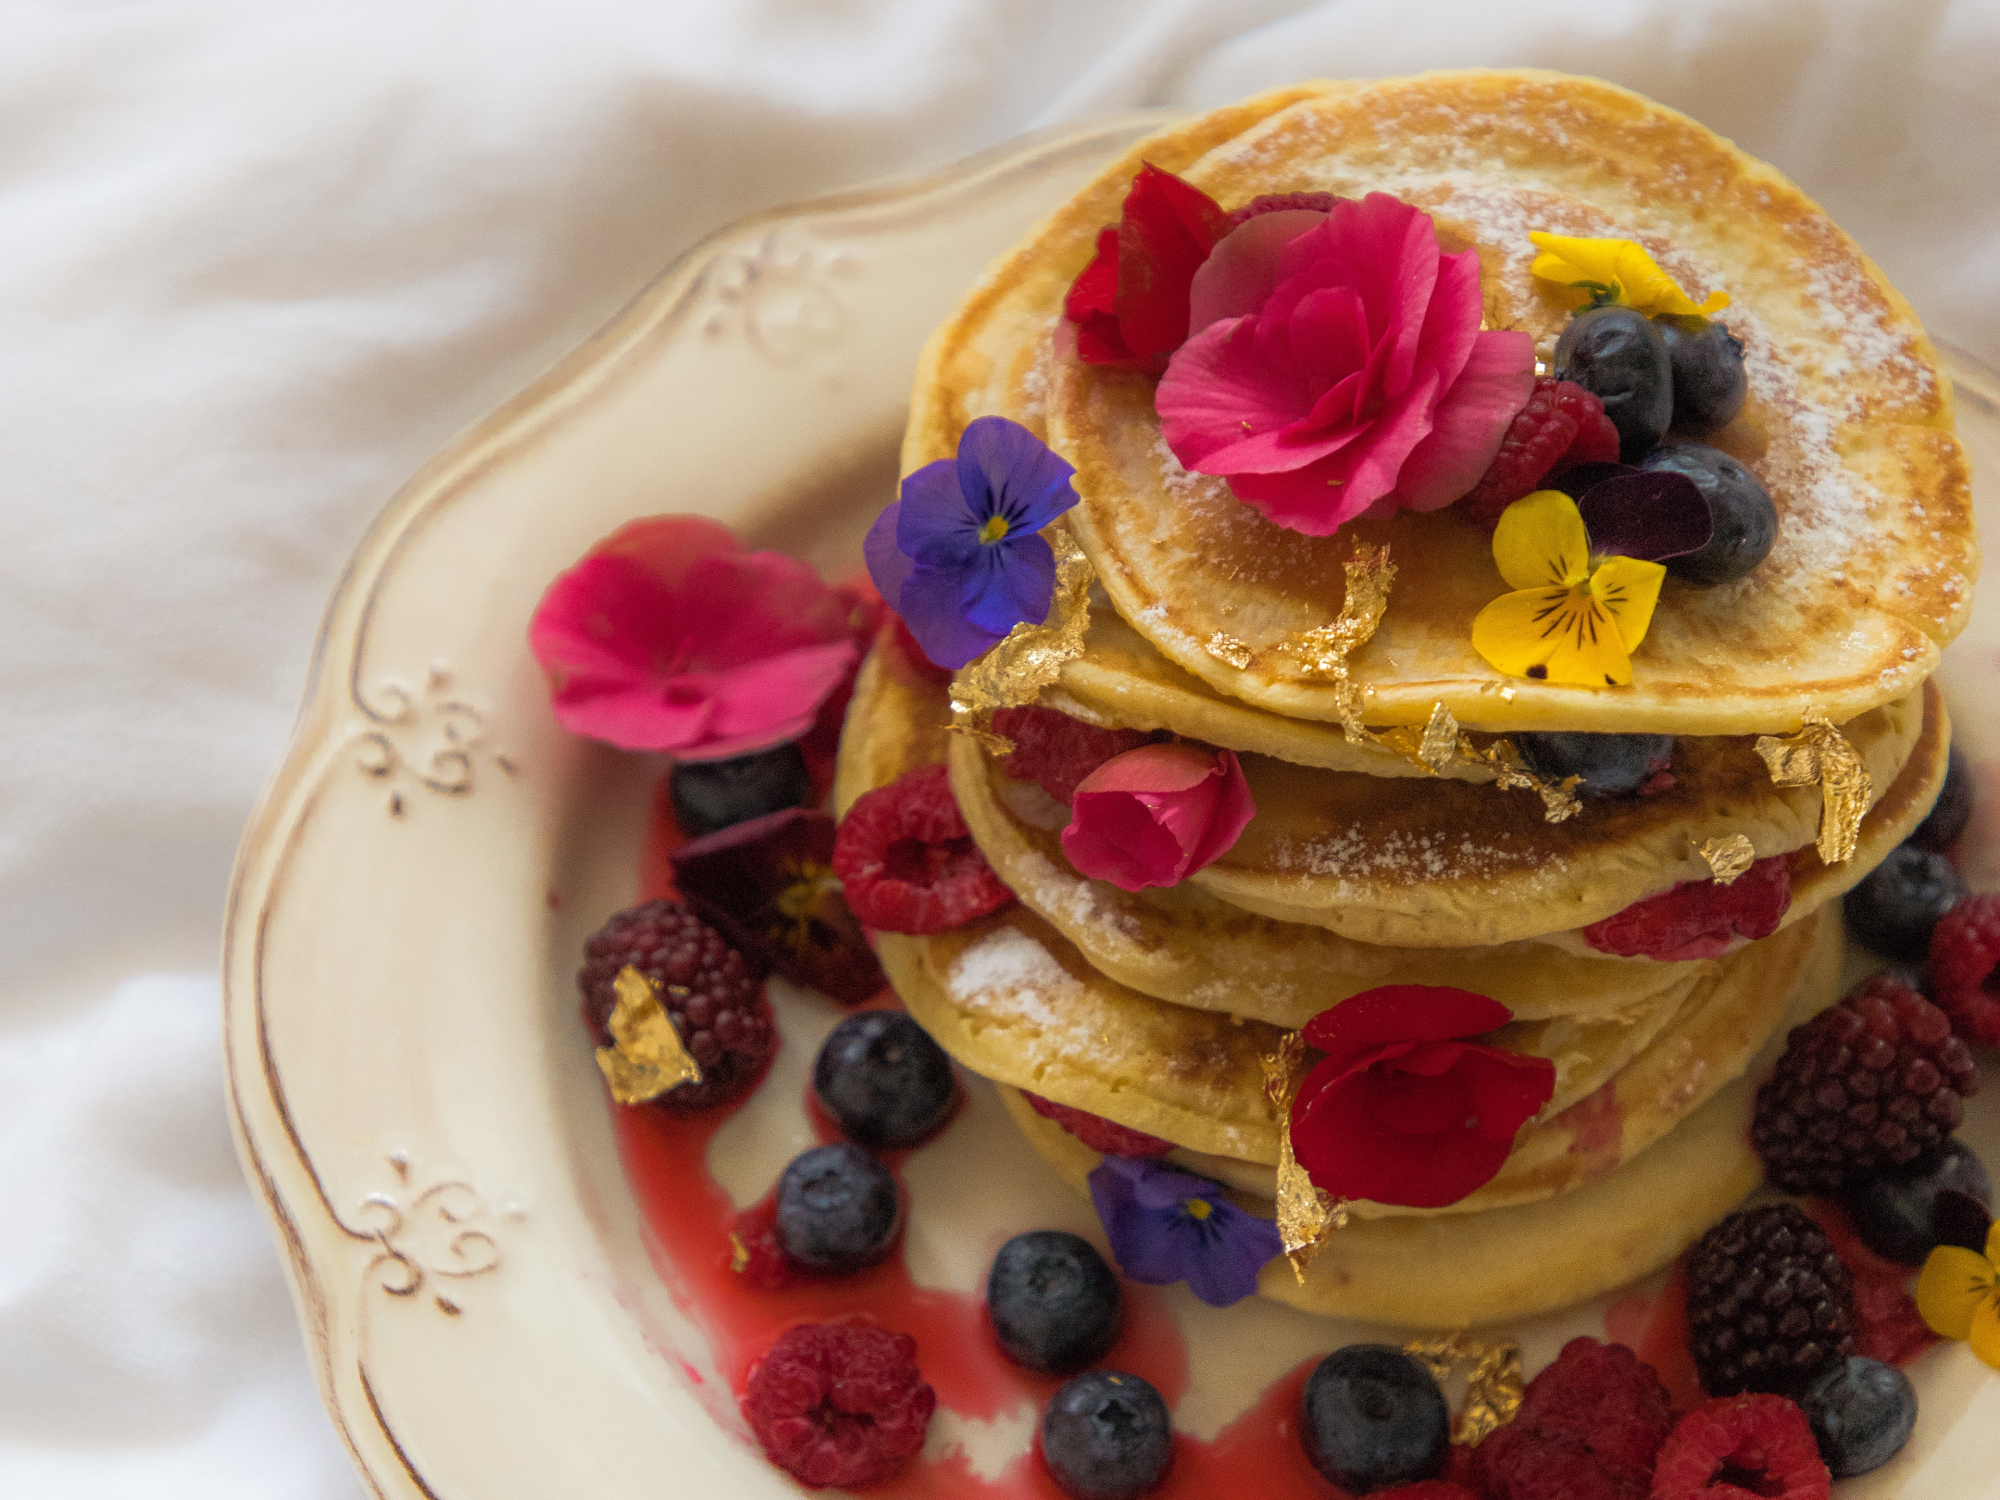 How to Use Edible Flowers For the Most Instagram-Worthy Plates